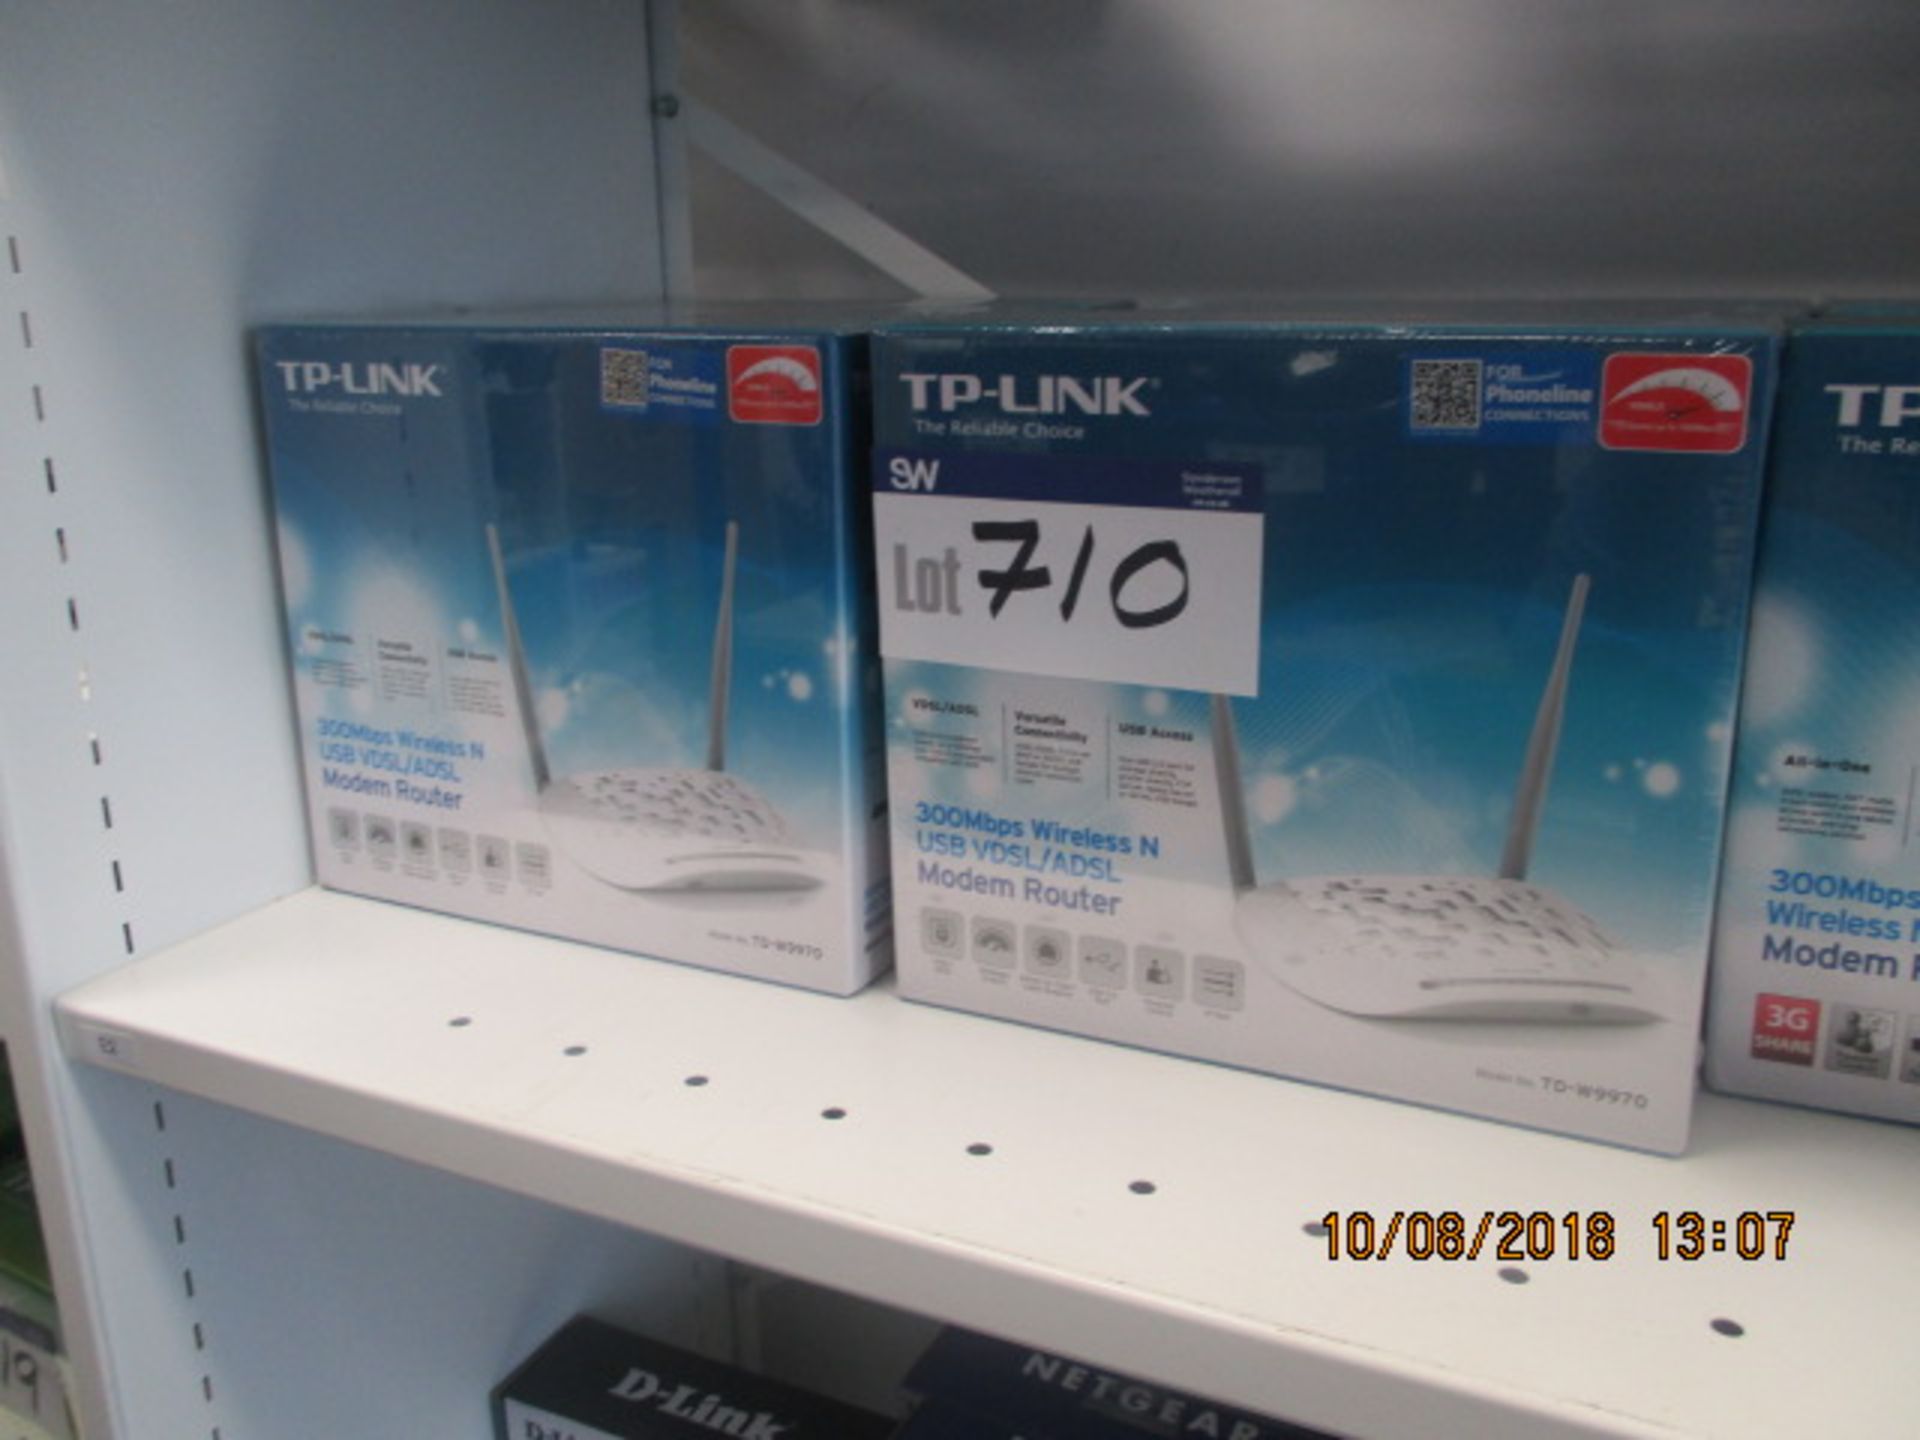 8 x TP-Link TD-W8968 300MBPS Wireless Modem Router